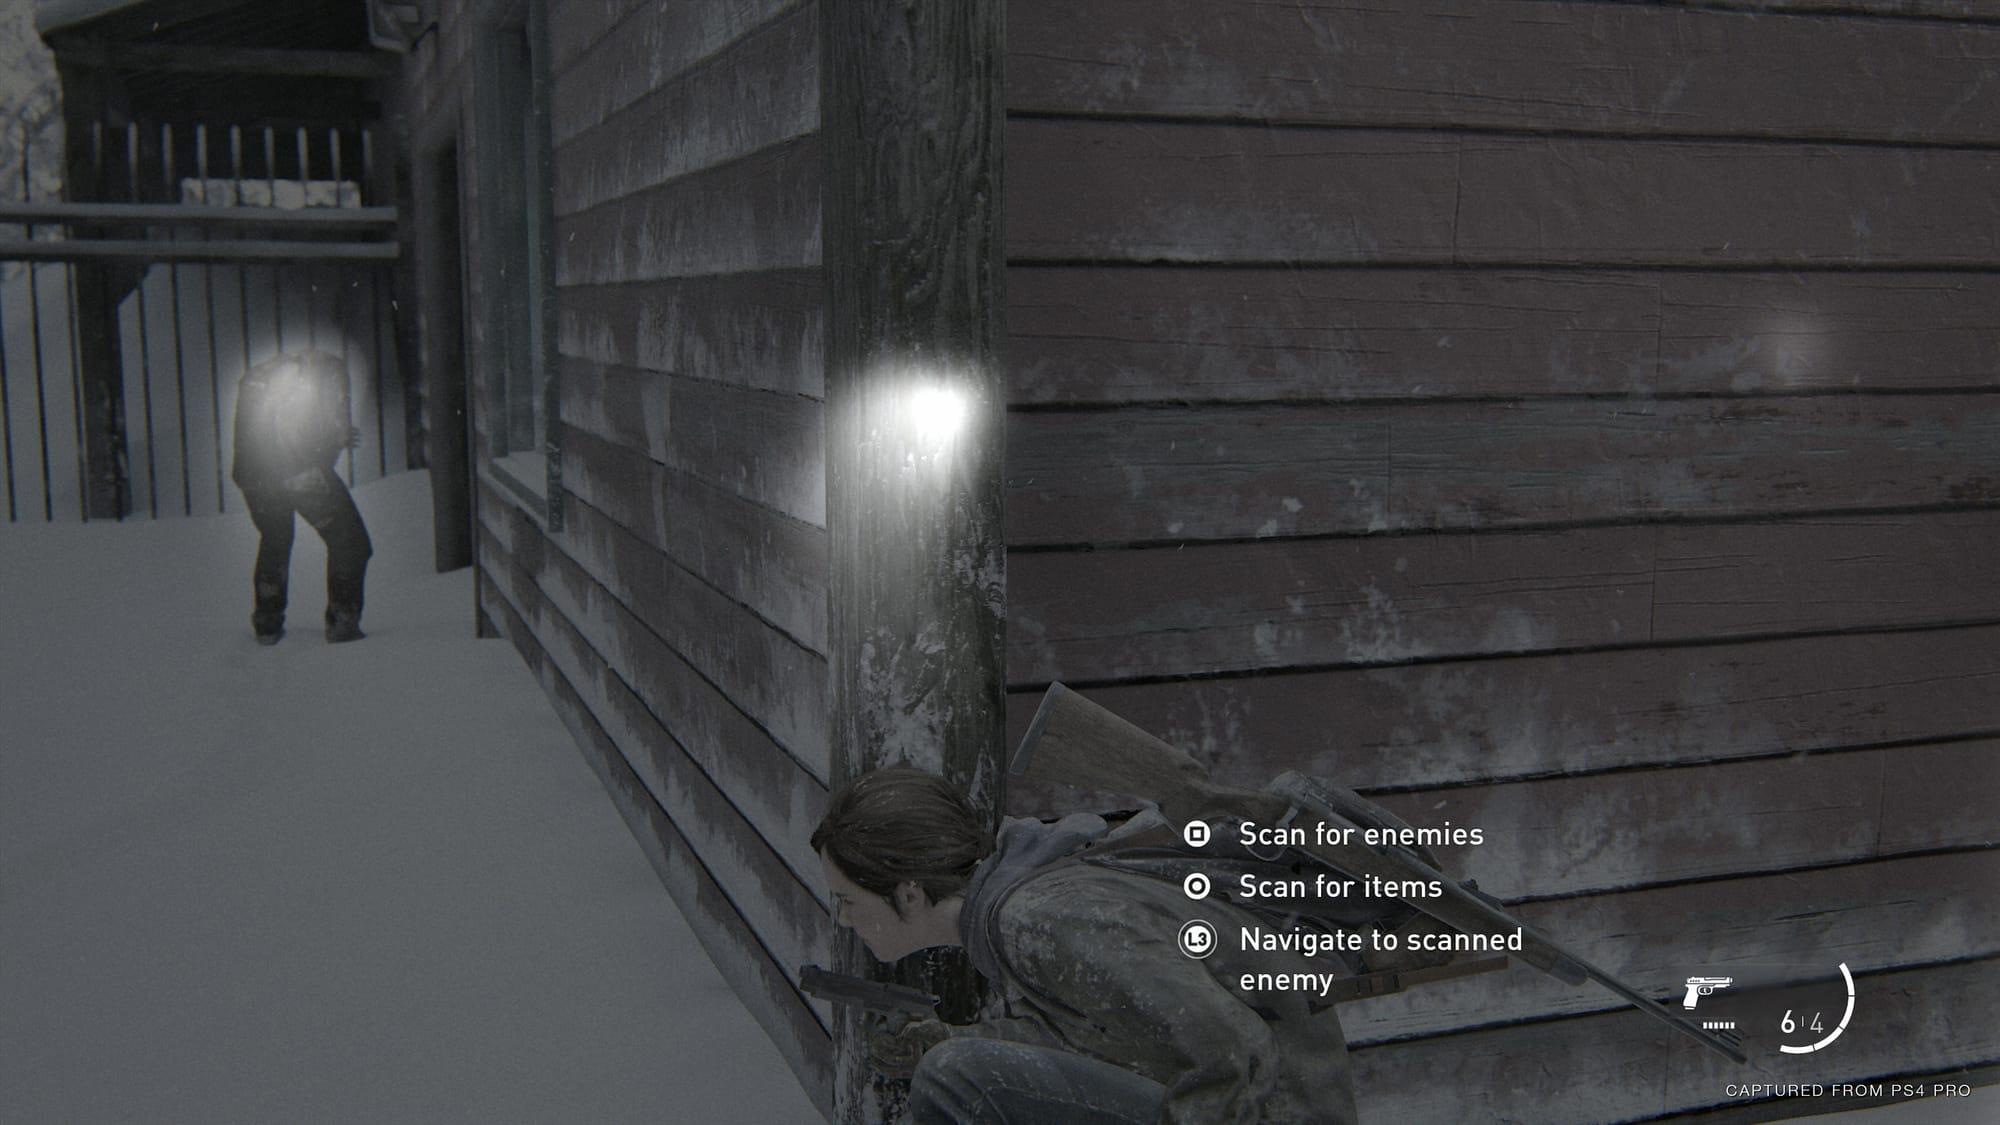 Accessibility options are shown as Ellie sneaks up on an enemy